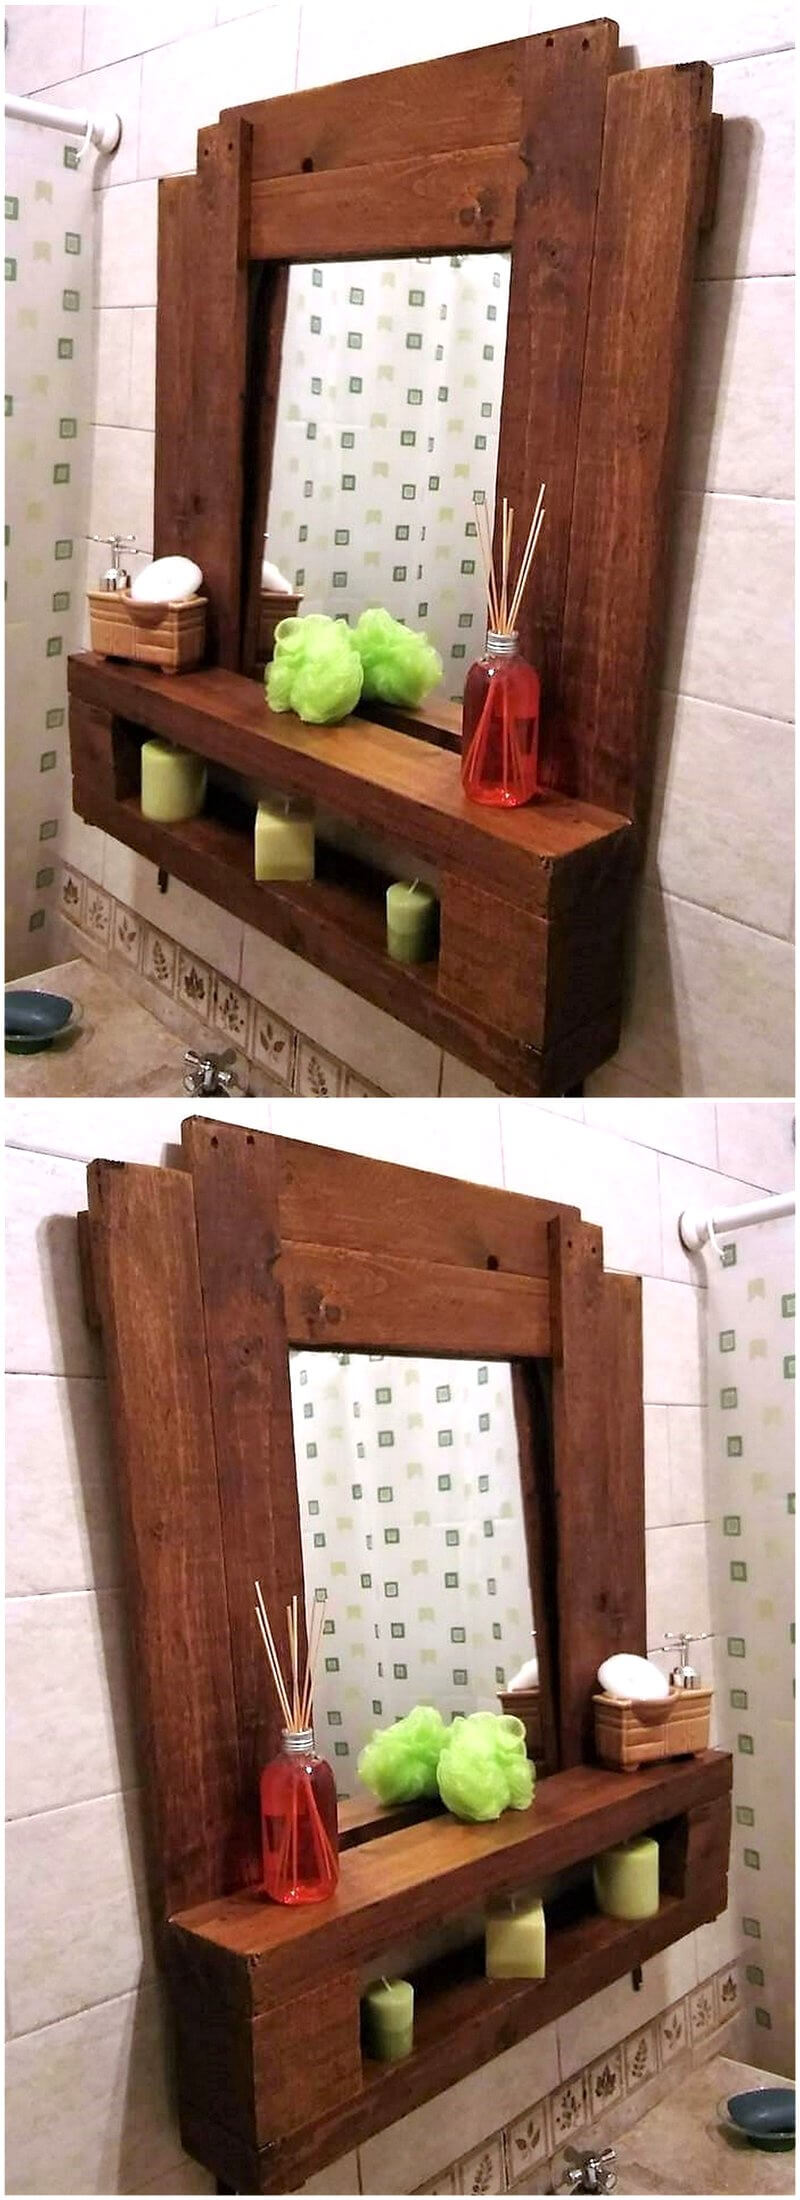 simple wood pallet mirror and shelving